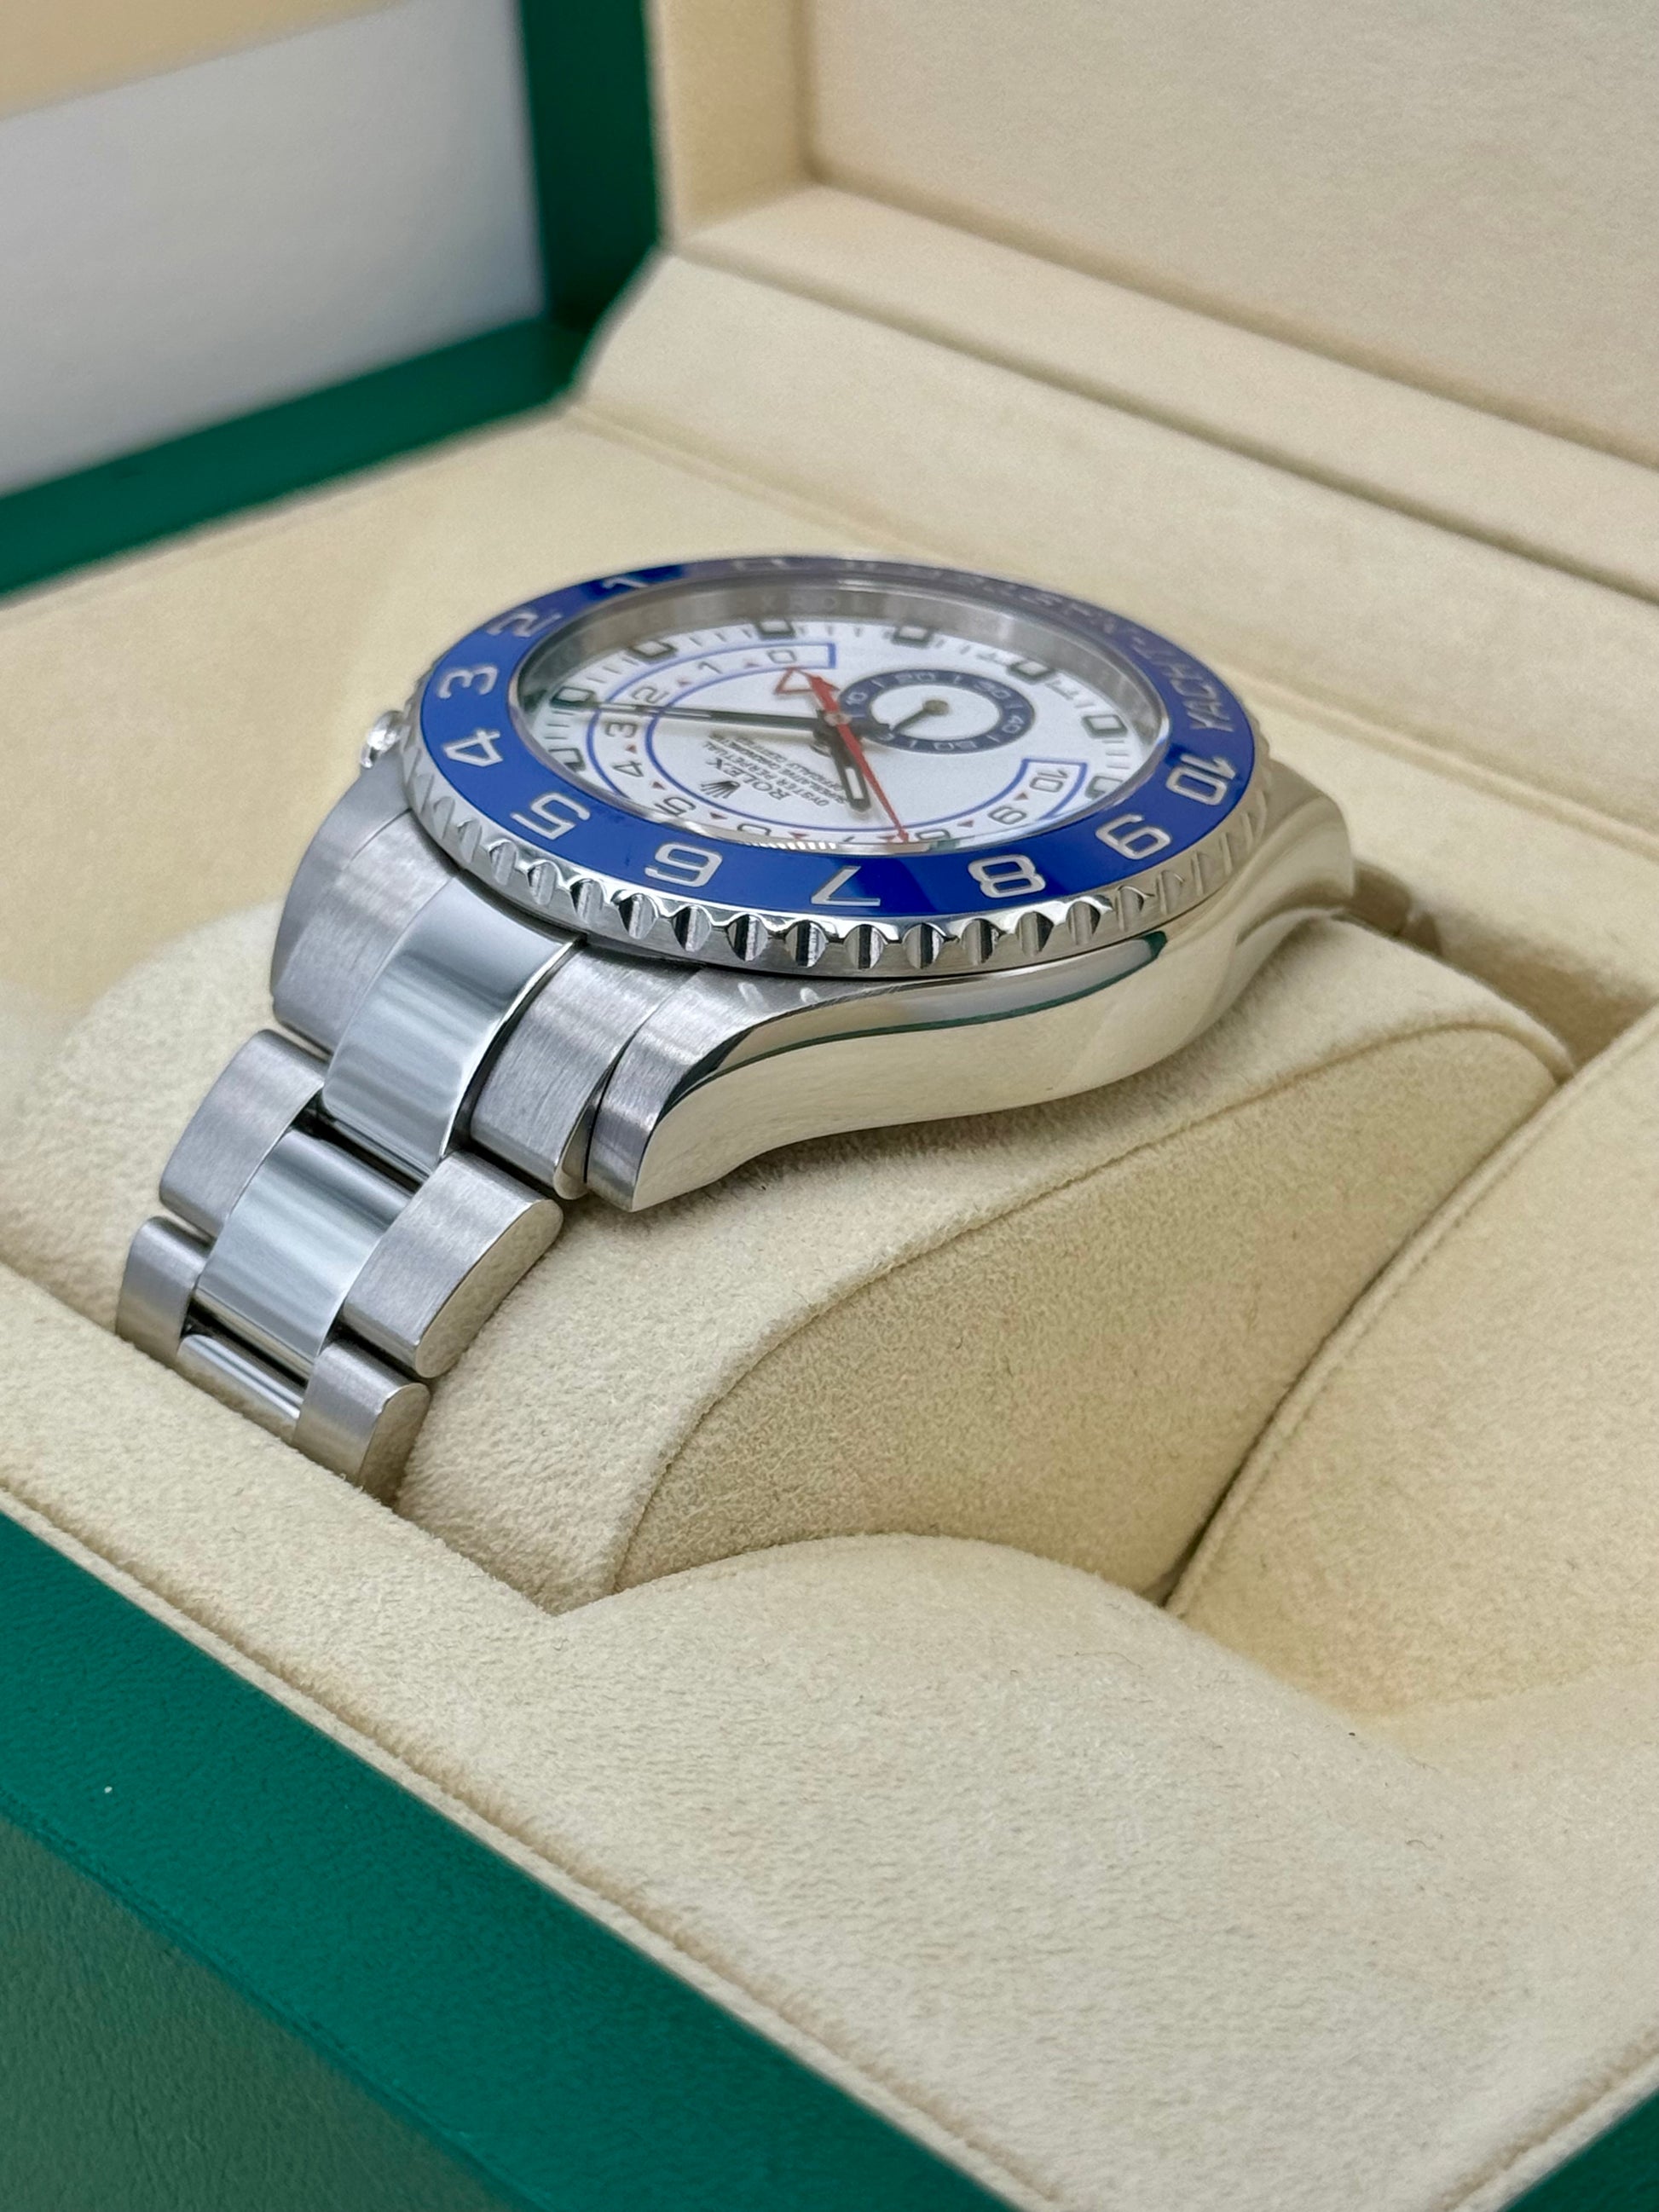 2013 Rolex Yacht-Master II 44mm 116680 Stainless Steel White Dial - MyWatchLLC